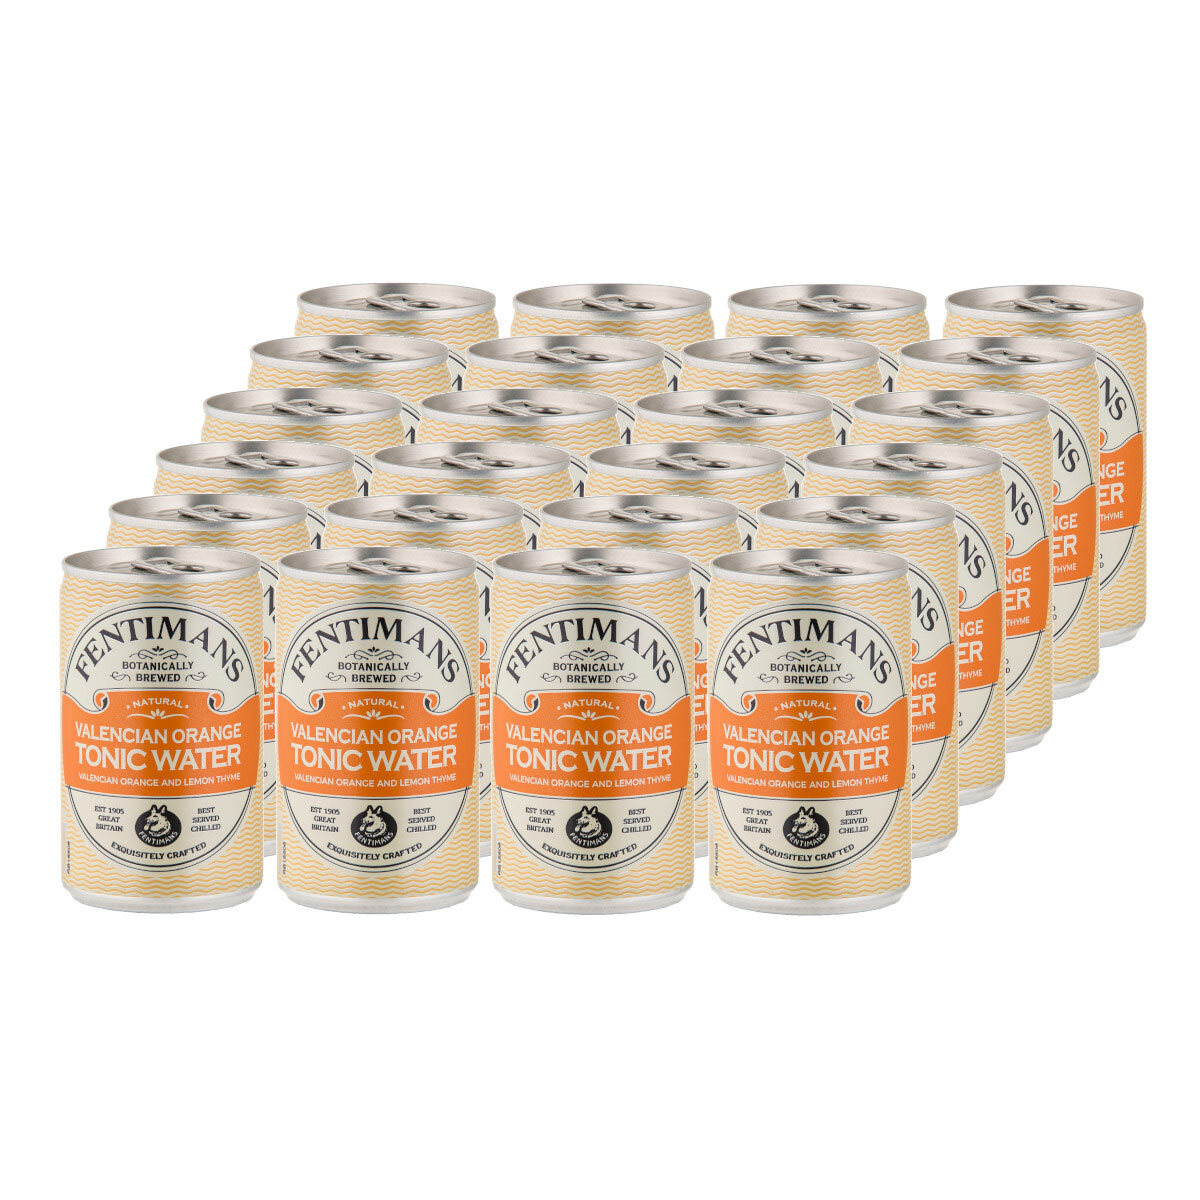 Image of 24 cans of Fentimans Valencian Orange